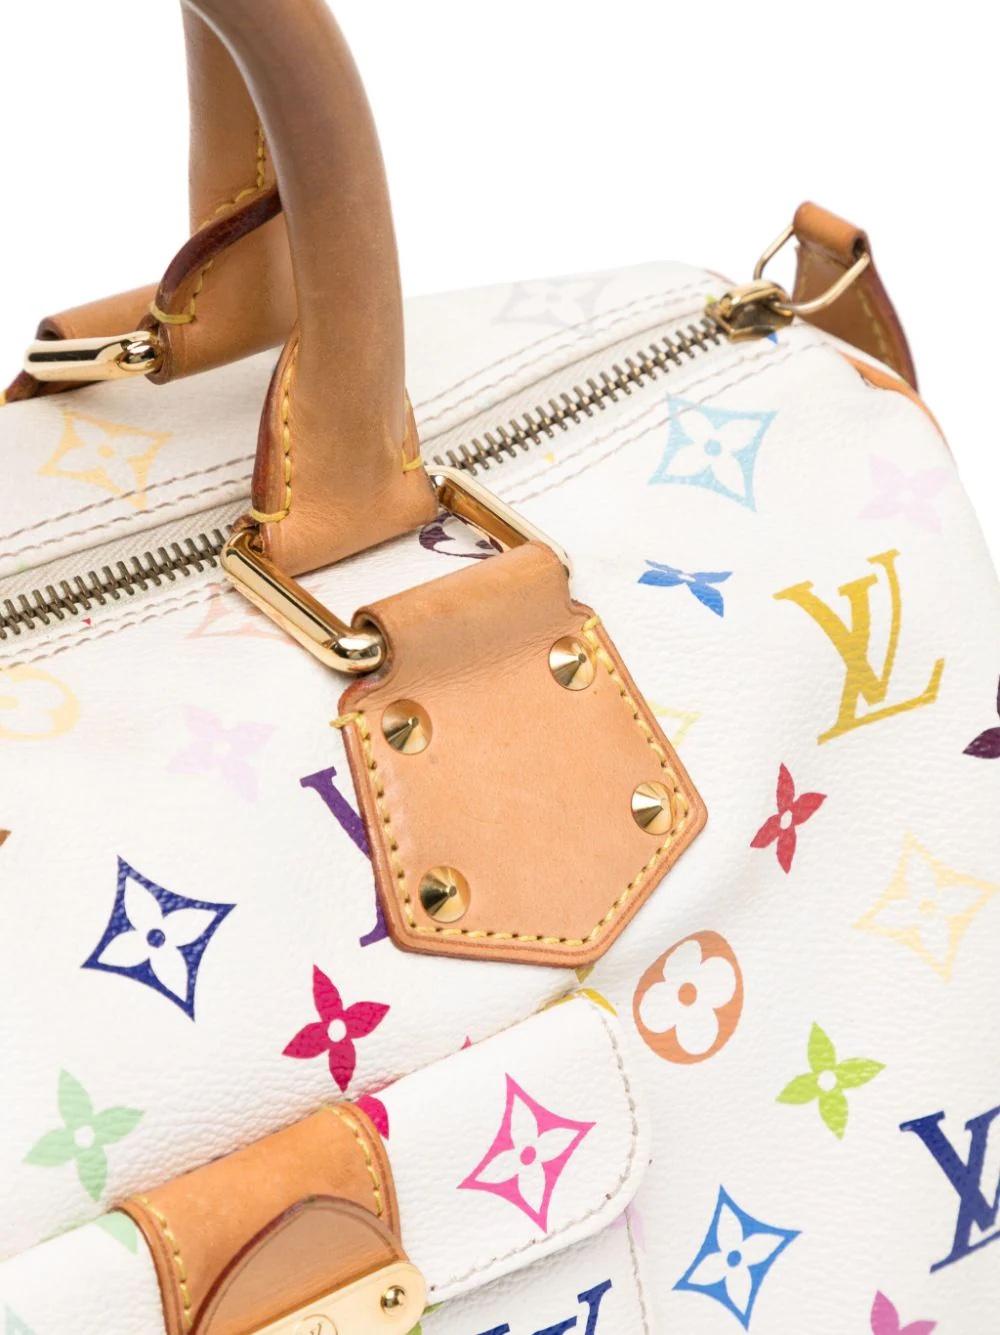 The 2003 Louis Vuitton x Takashi Murakami collaboration features this beautiful speedy 30 bag. Seen on the runway and on many celebrities, this is an iconic piece of fashion history. 

* Multicolour
* Signature Monogram Multicolour canvas
* Leather